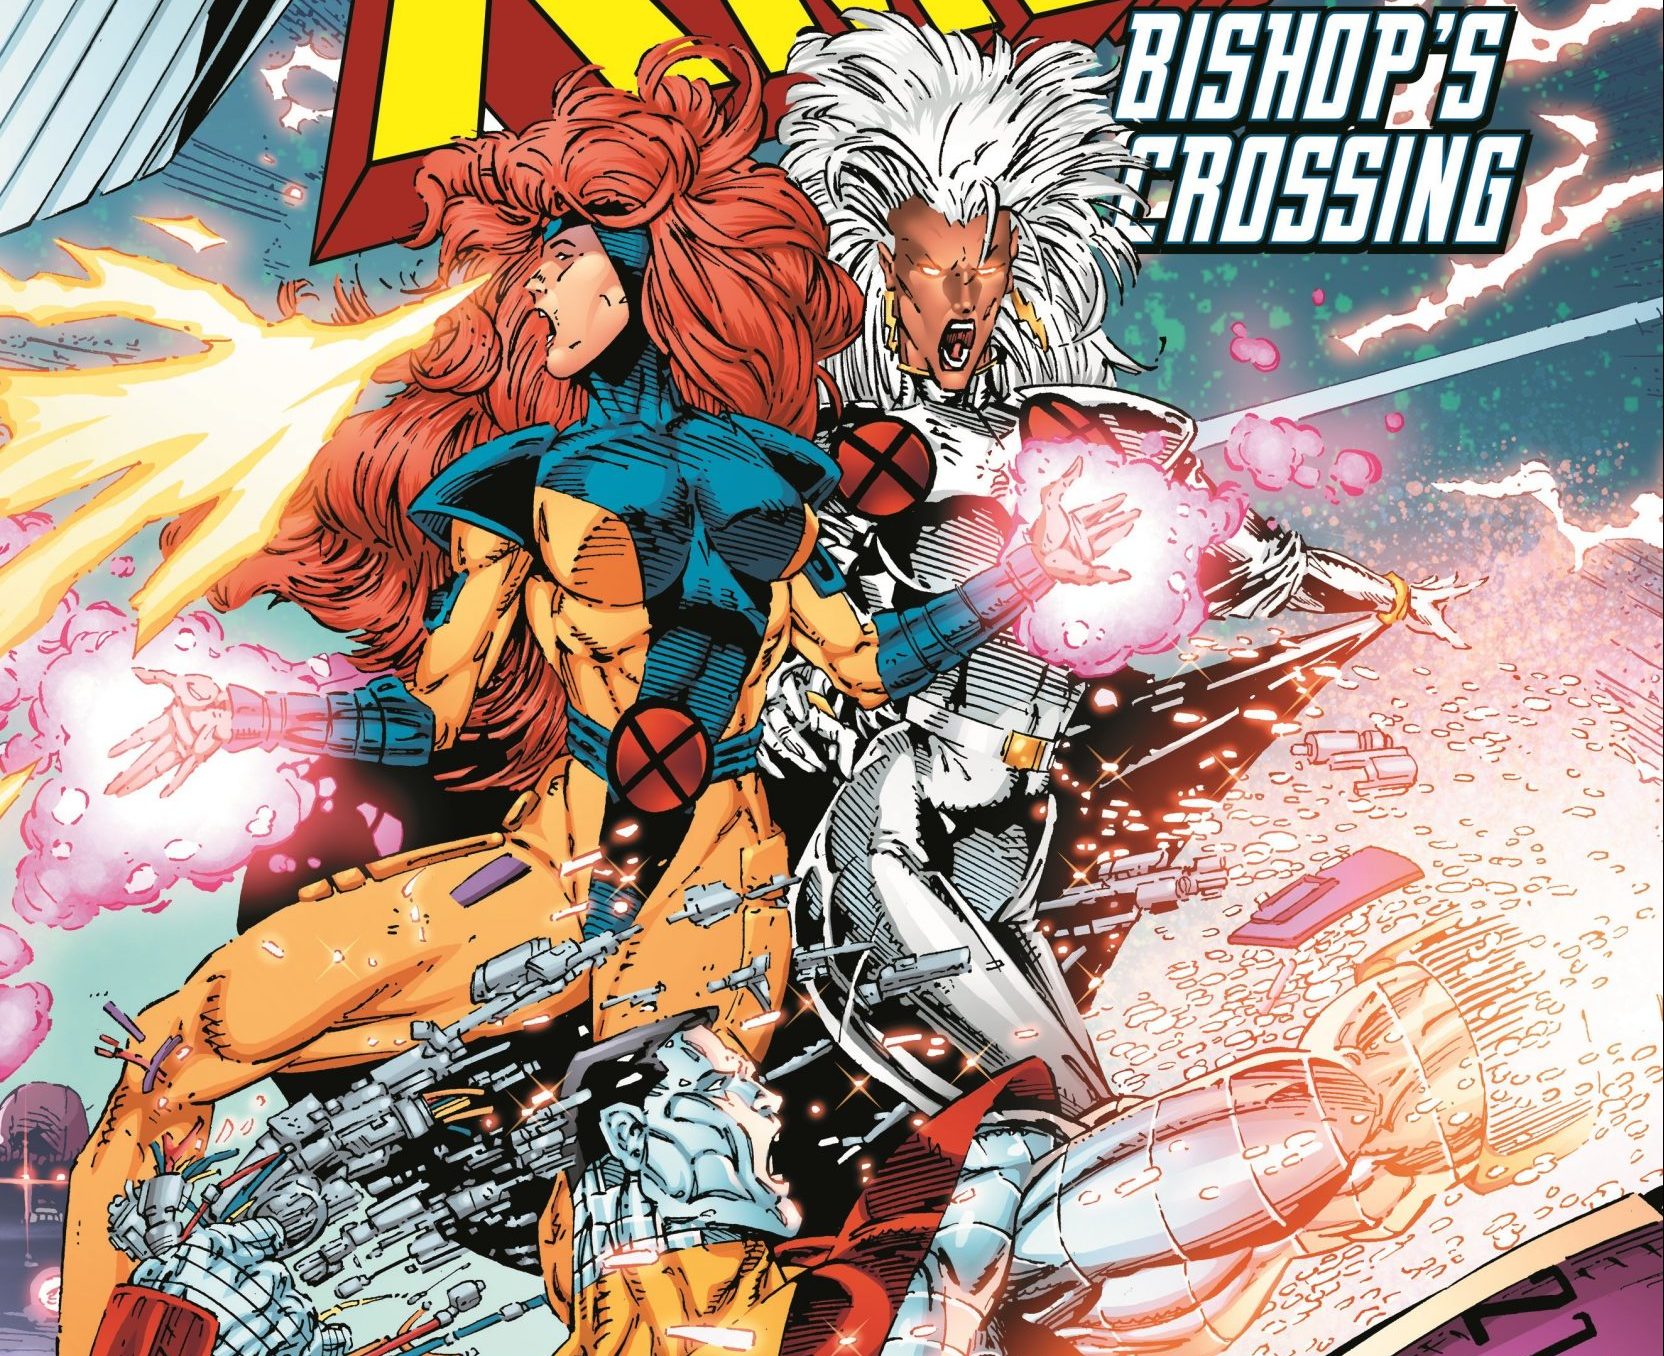 X-Men Epic Collection: Bishop's Crossing